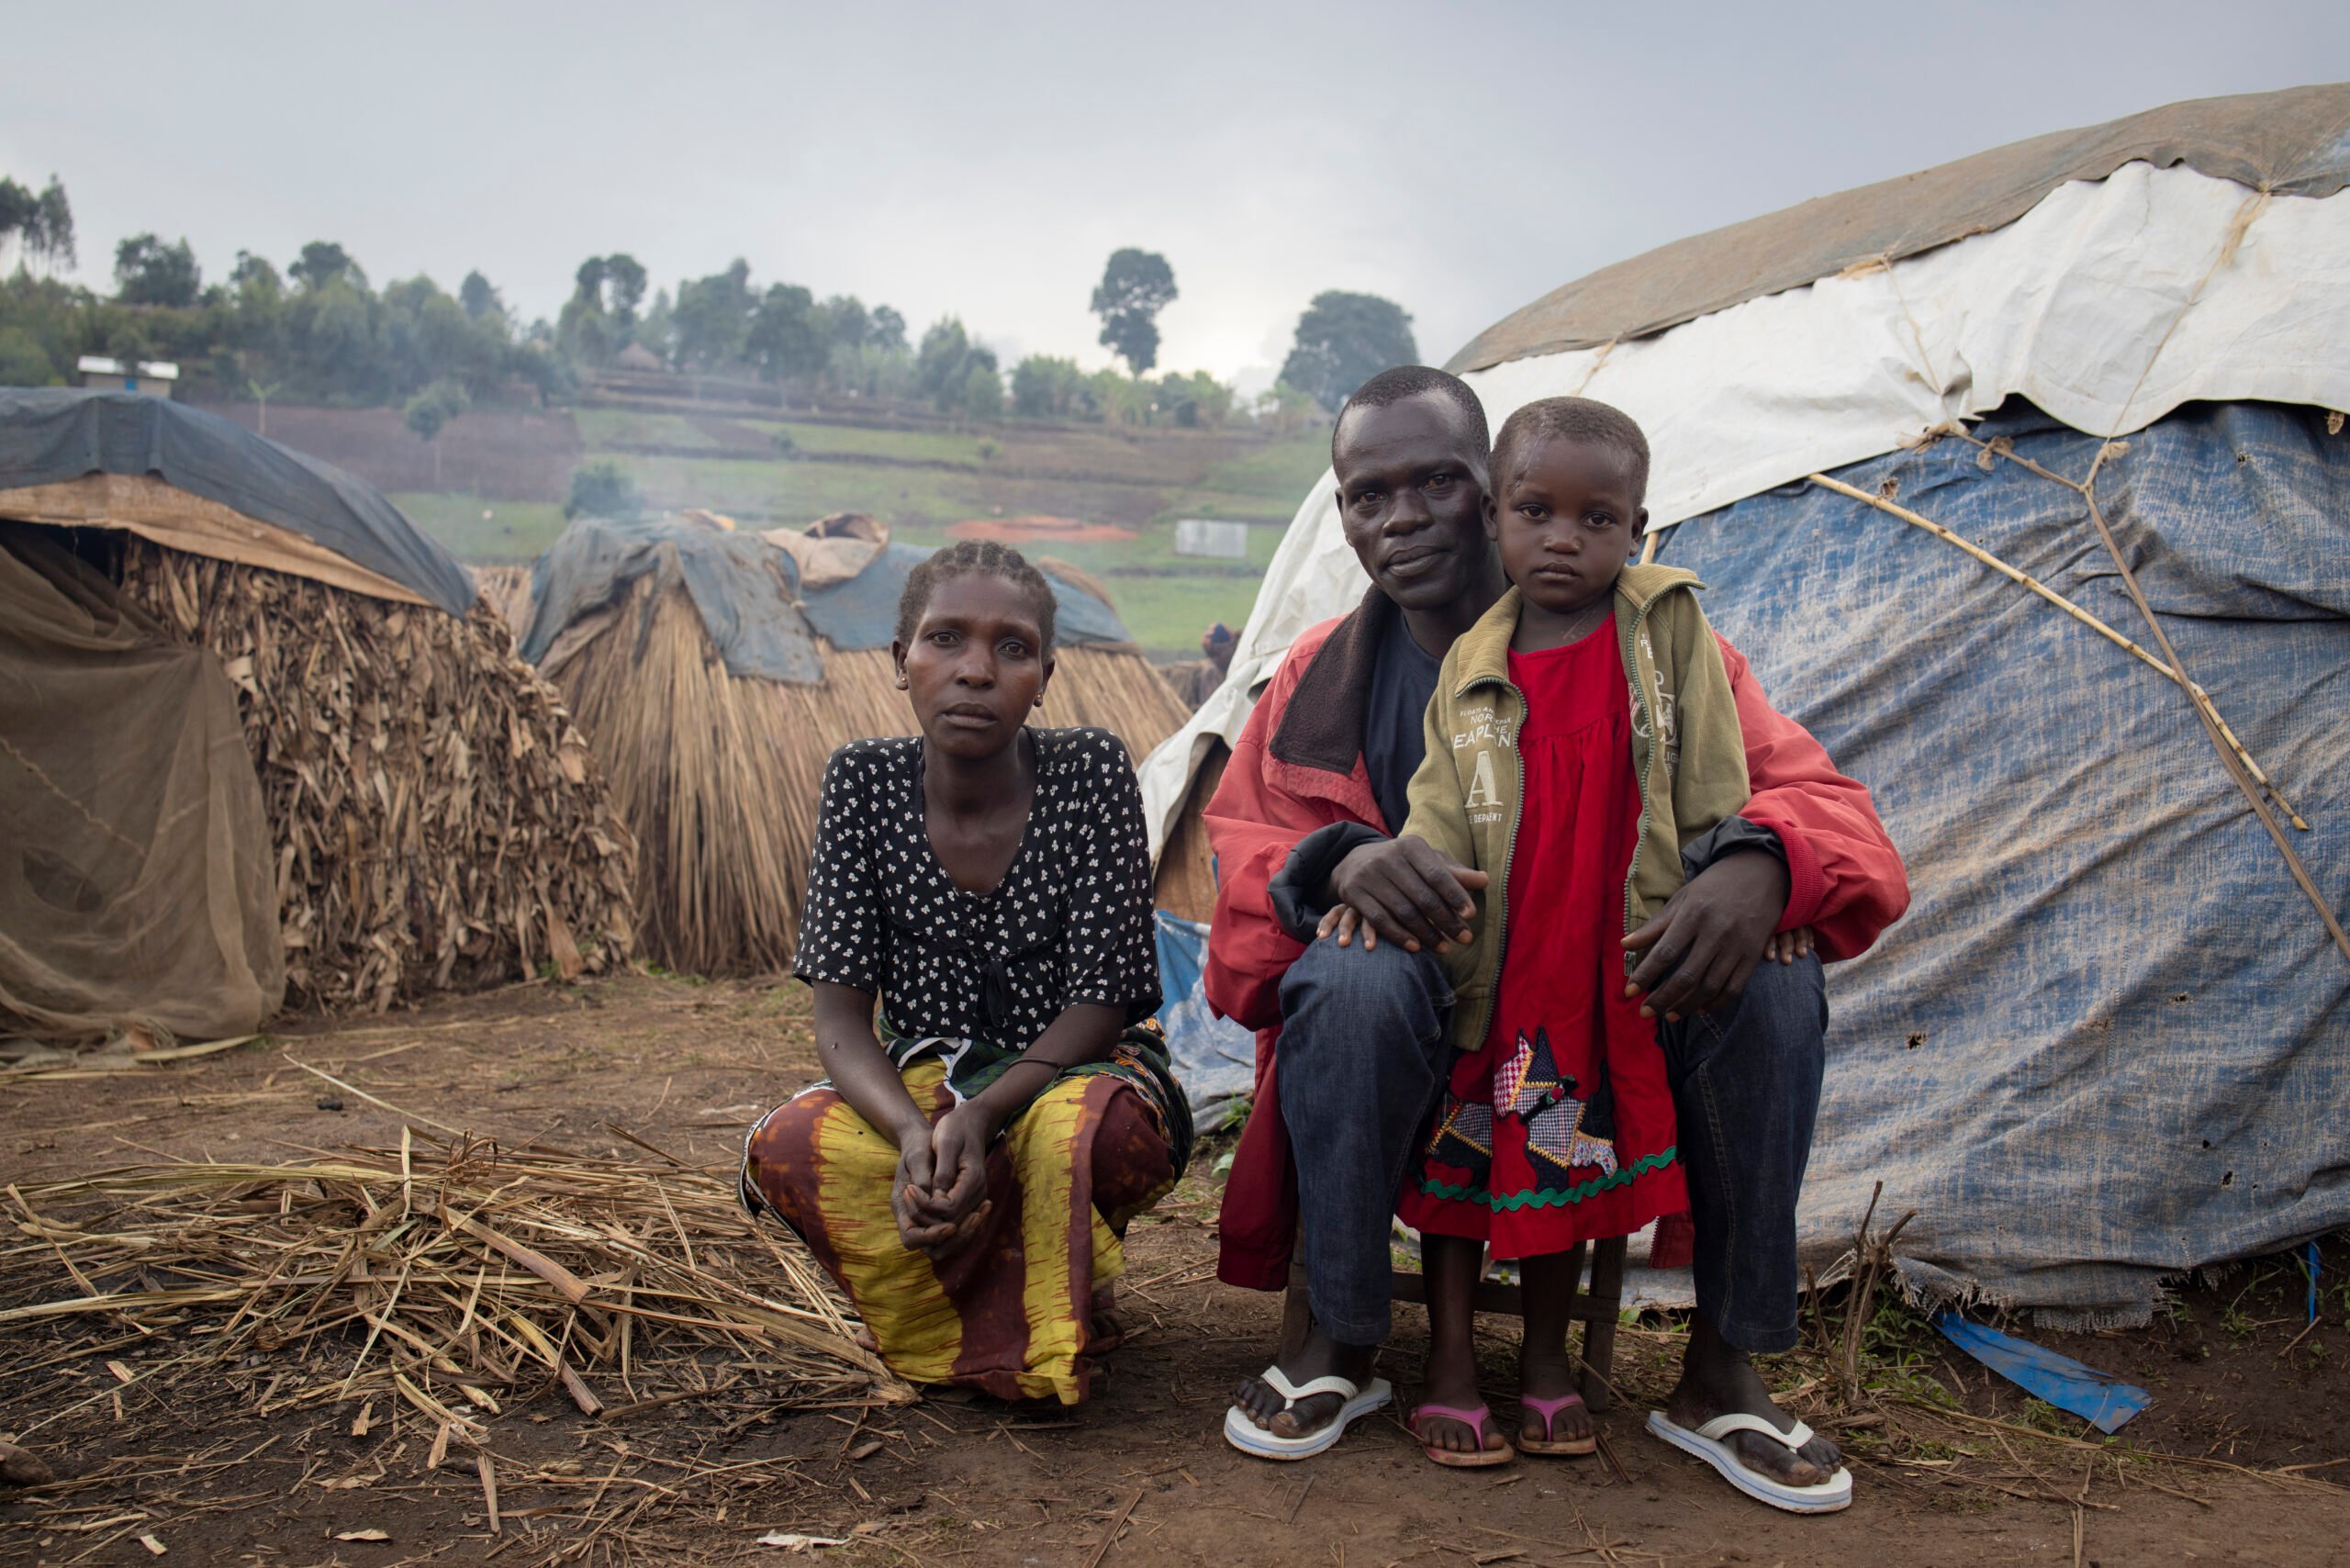 Four-year-old Odette with her parents in Plain Savo site for displaced people. She received machete blows to her head when the site was attacked by armed men on 1 February 2022.